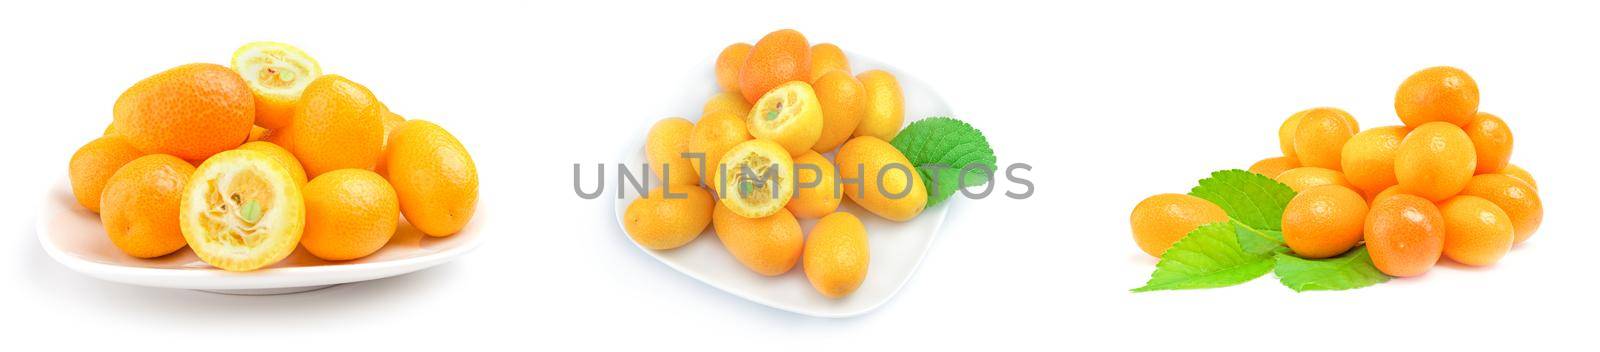 Collage of cumquats isolated on a white background by Proff